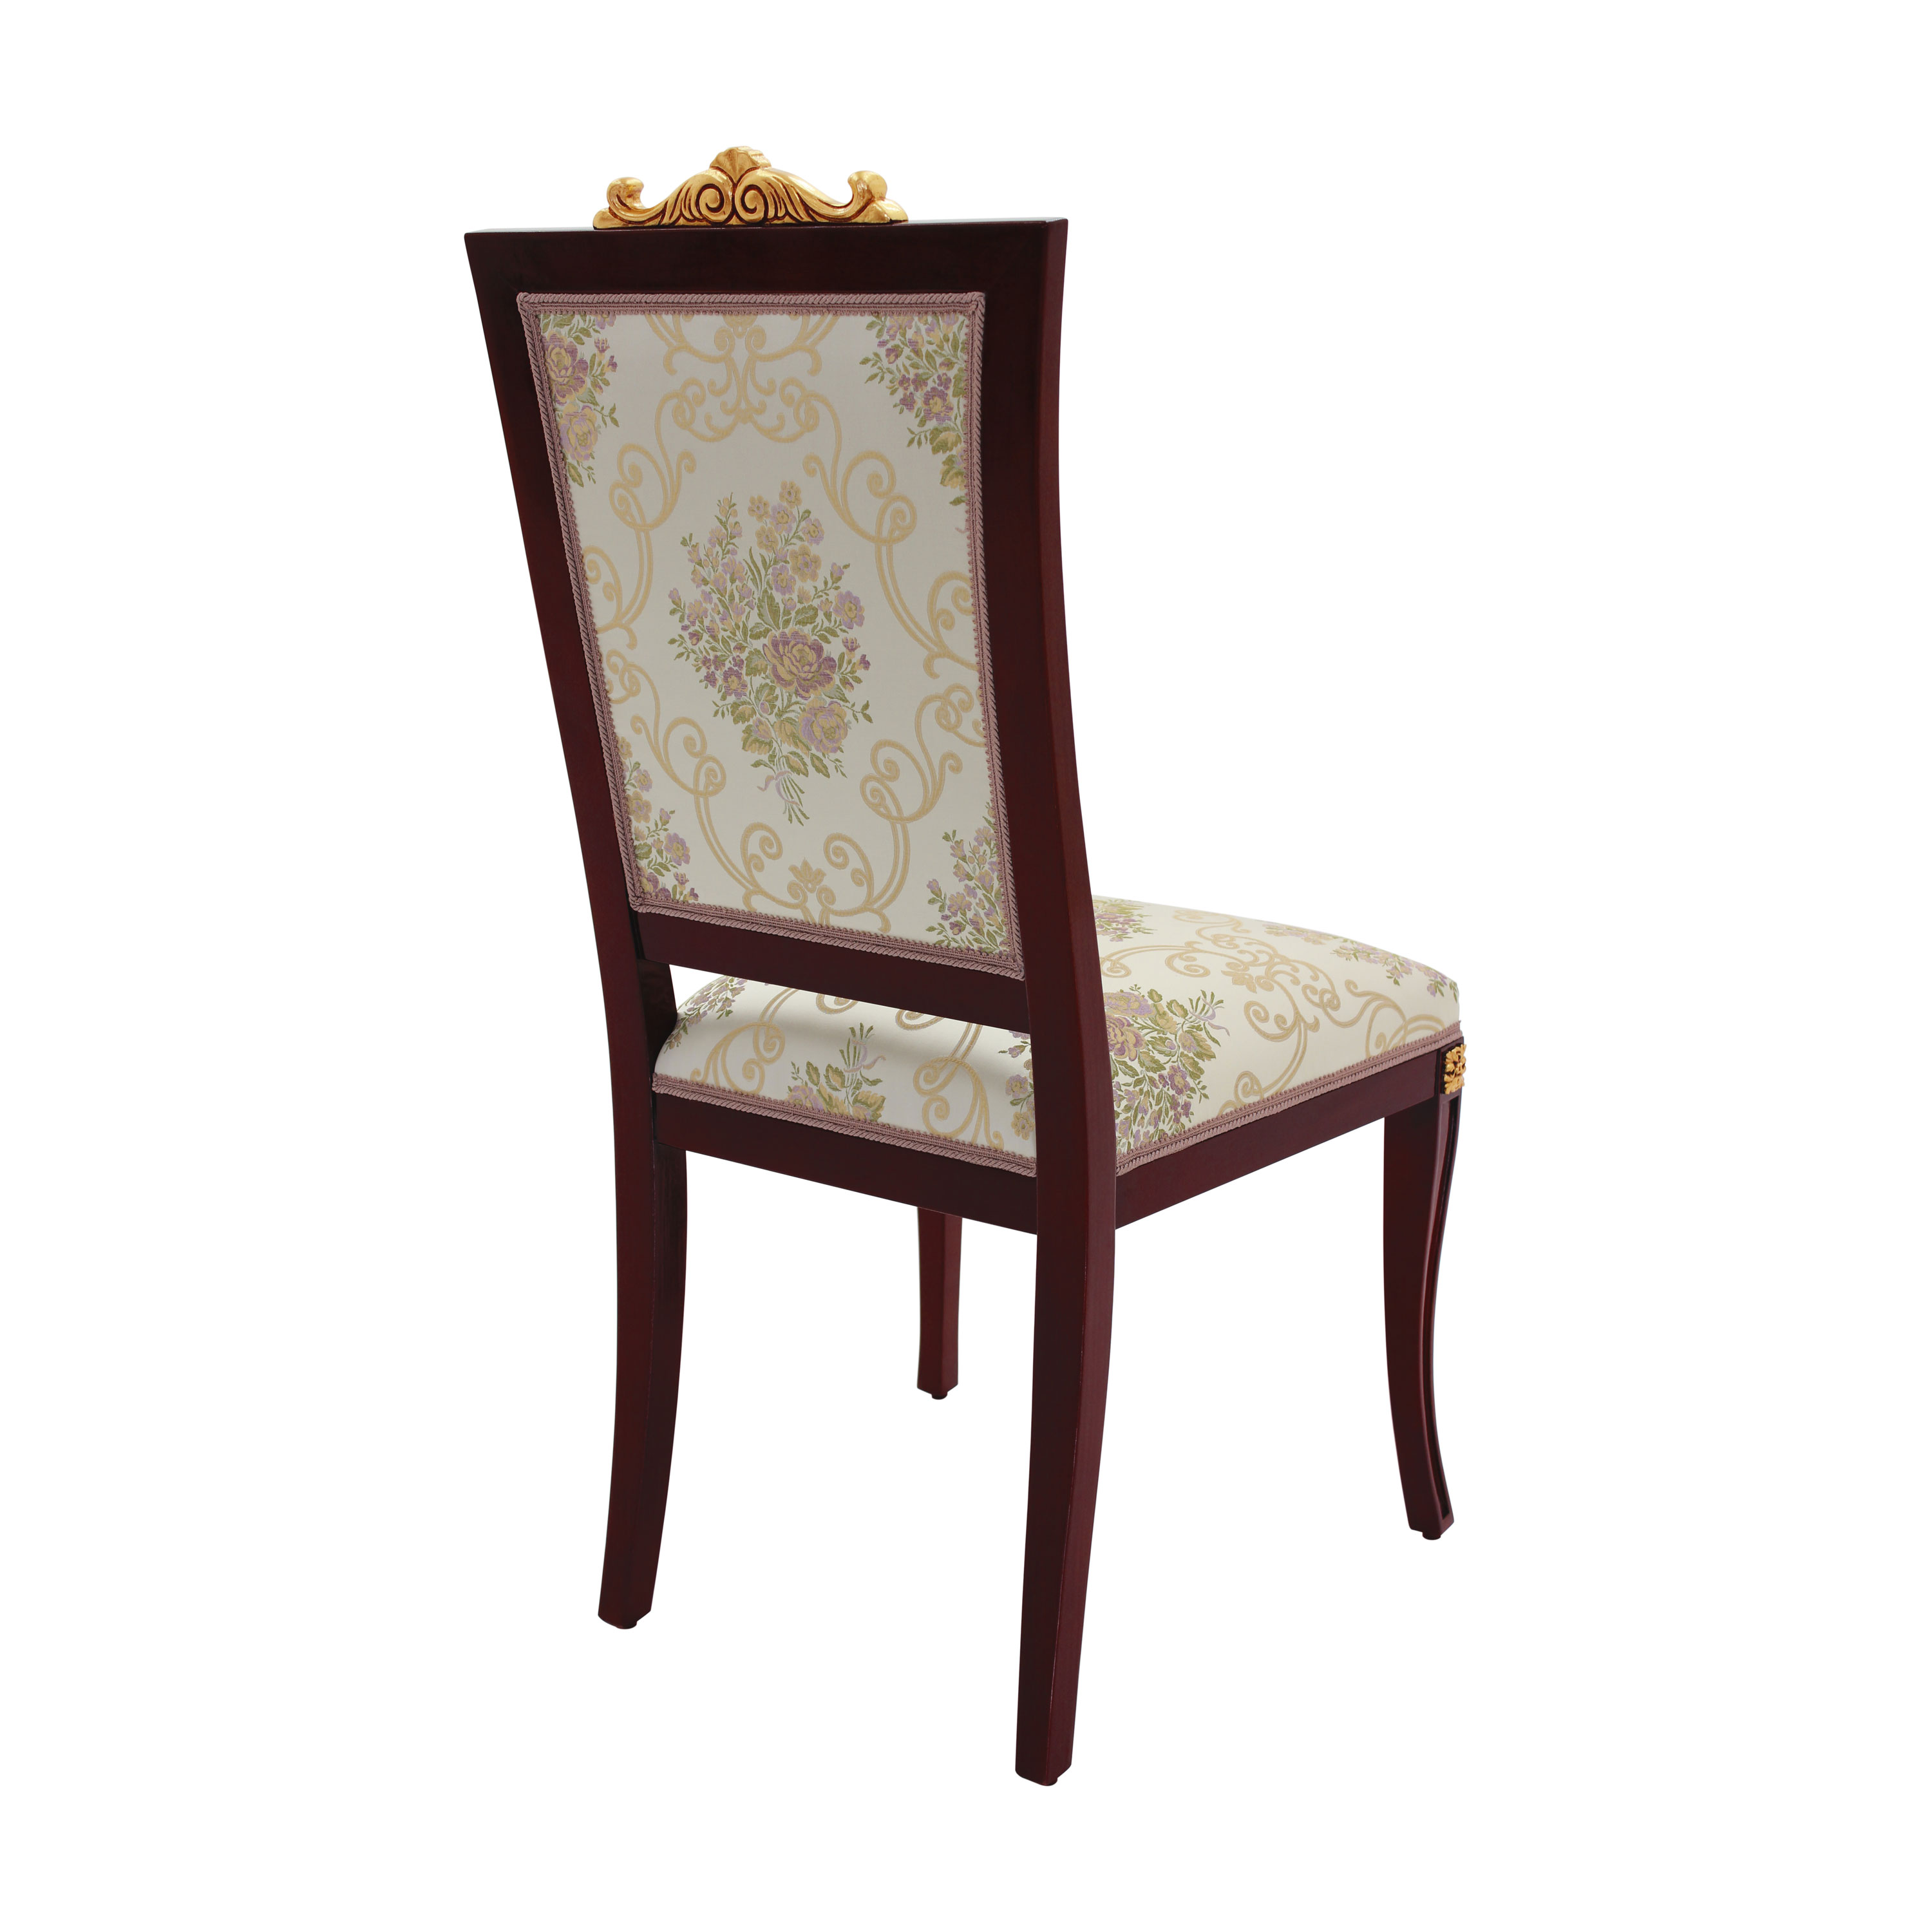 Louis XV Long Seated Chair, Antique Vintage Furniture Reproduction,  Victorian French Furniture